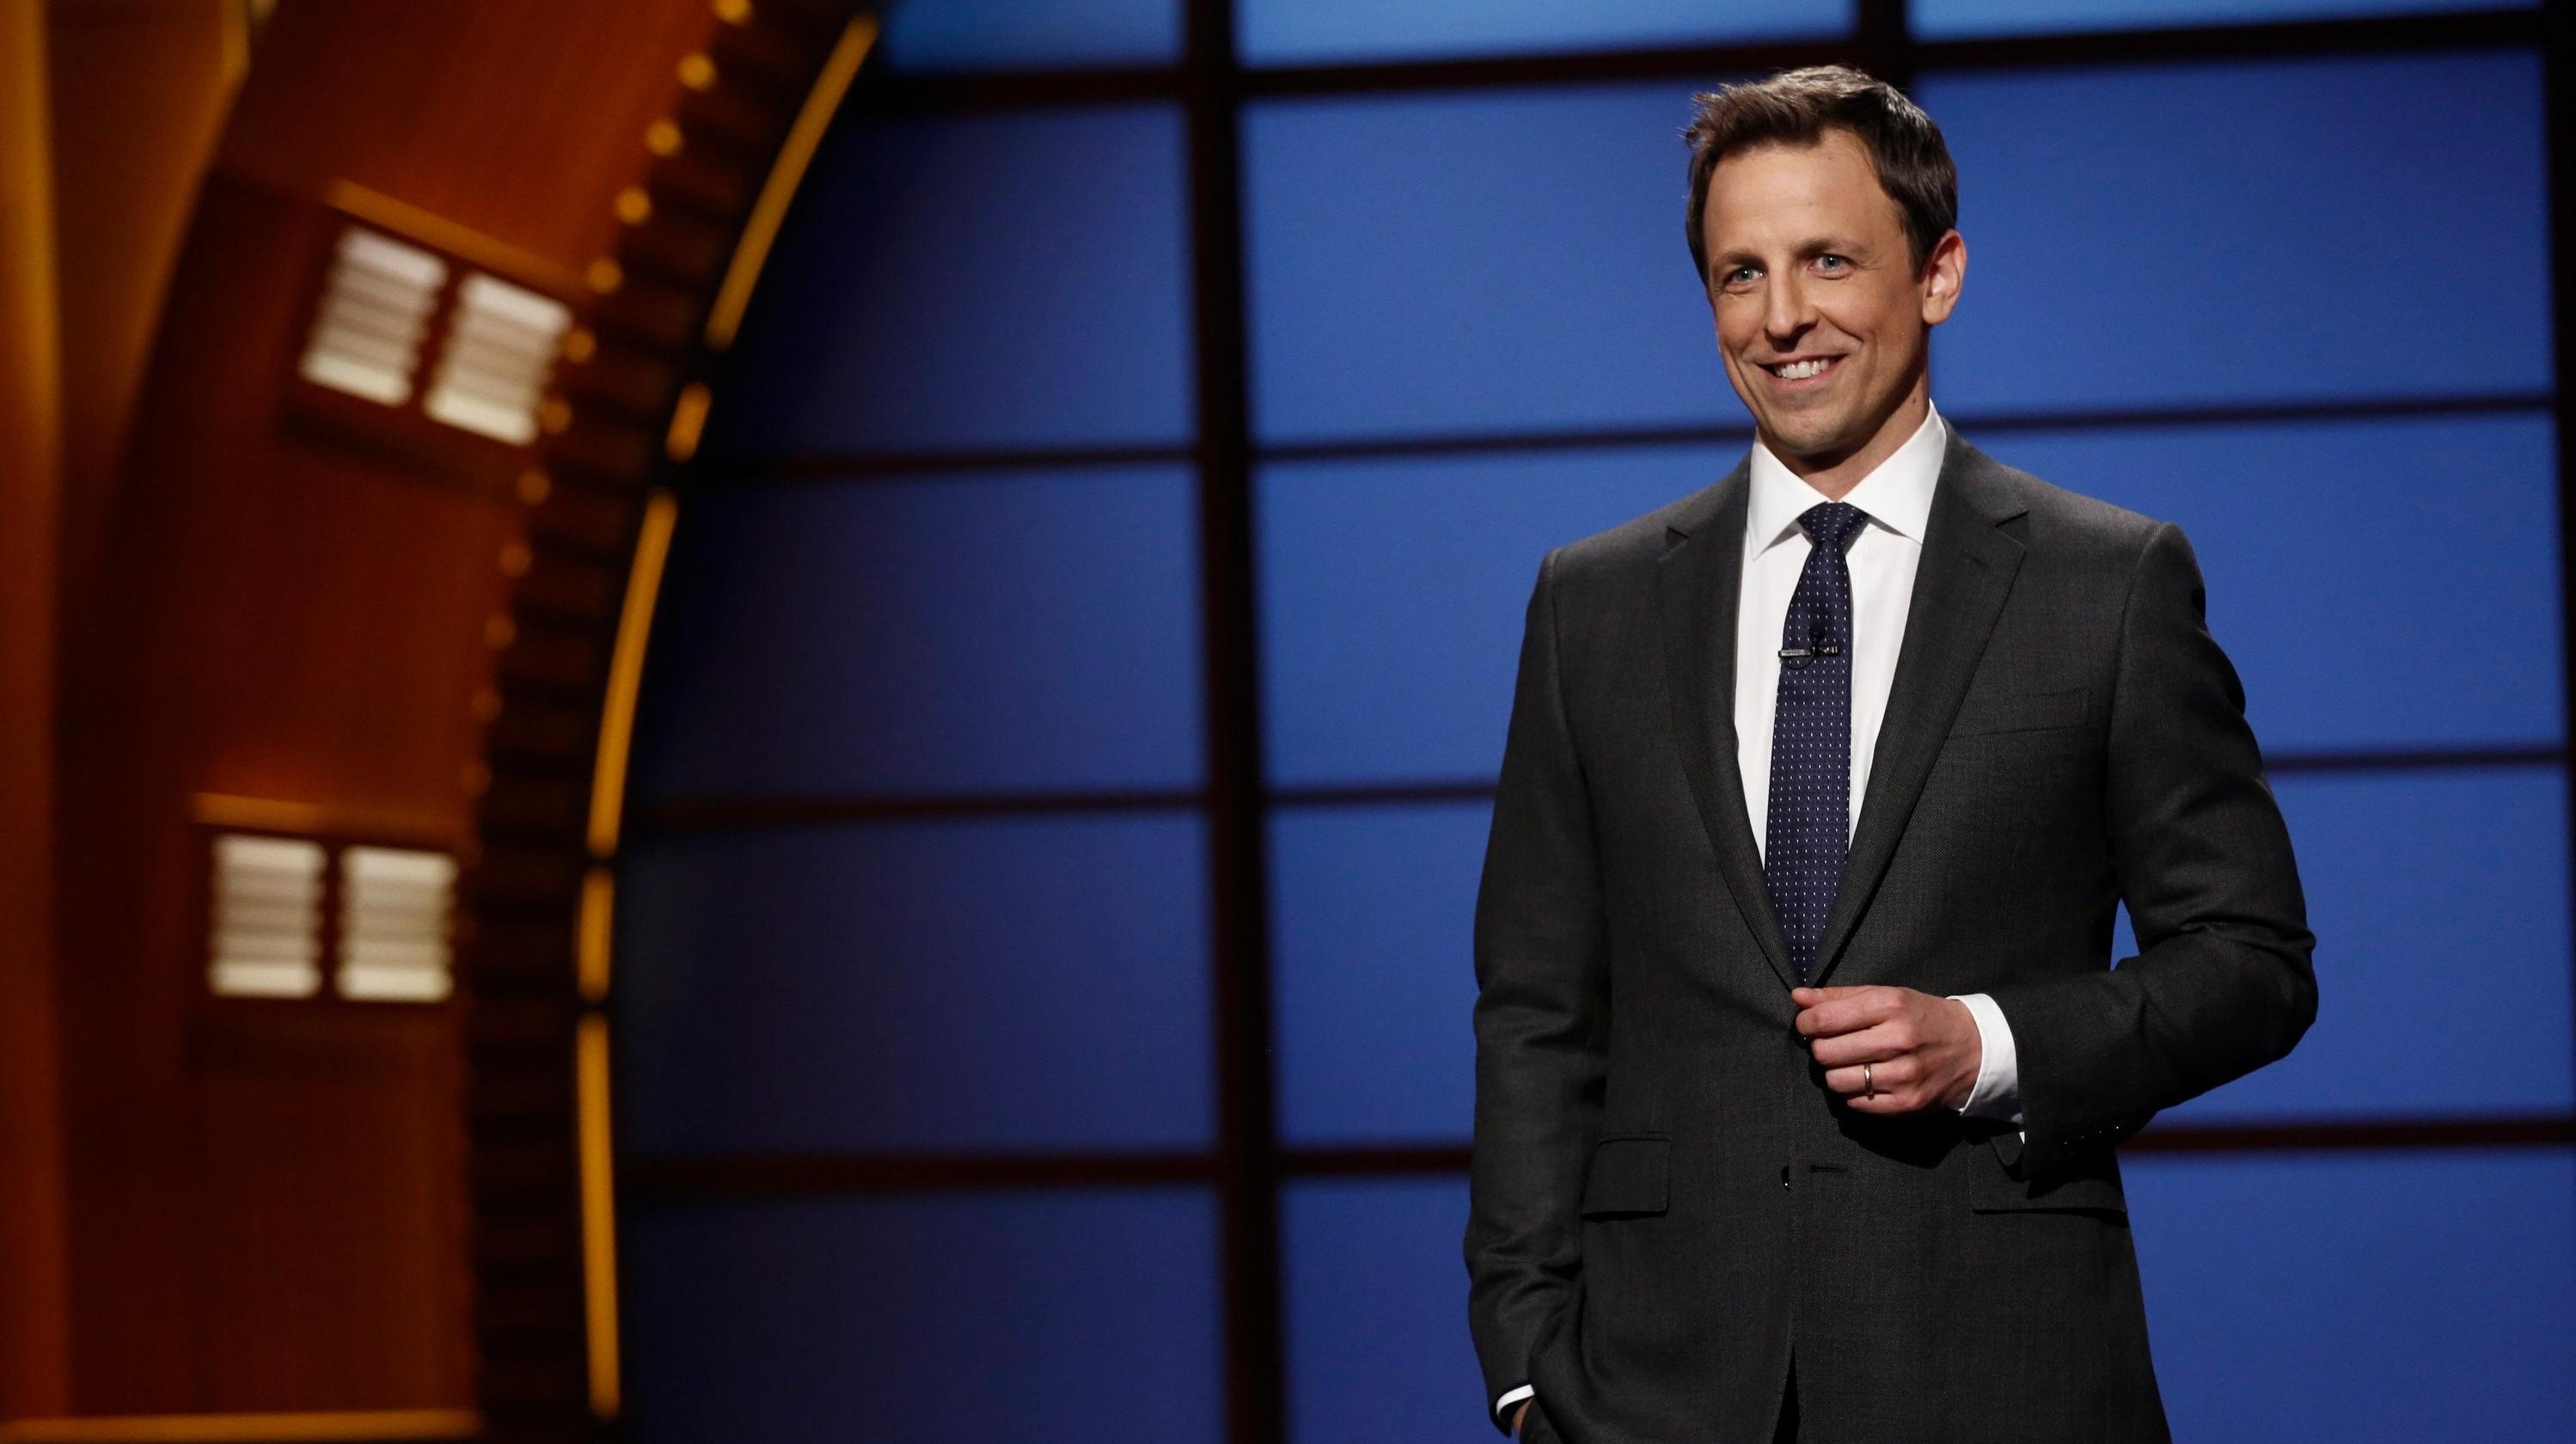 NBC cancels Late Night episodes for the week after Seth Meyers tests positive for COVID